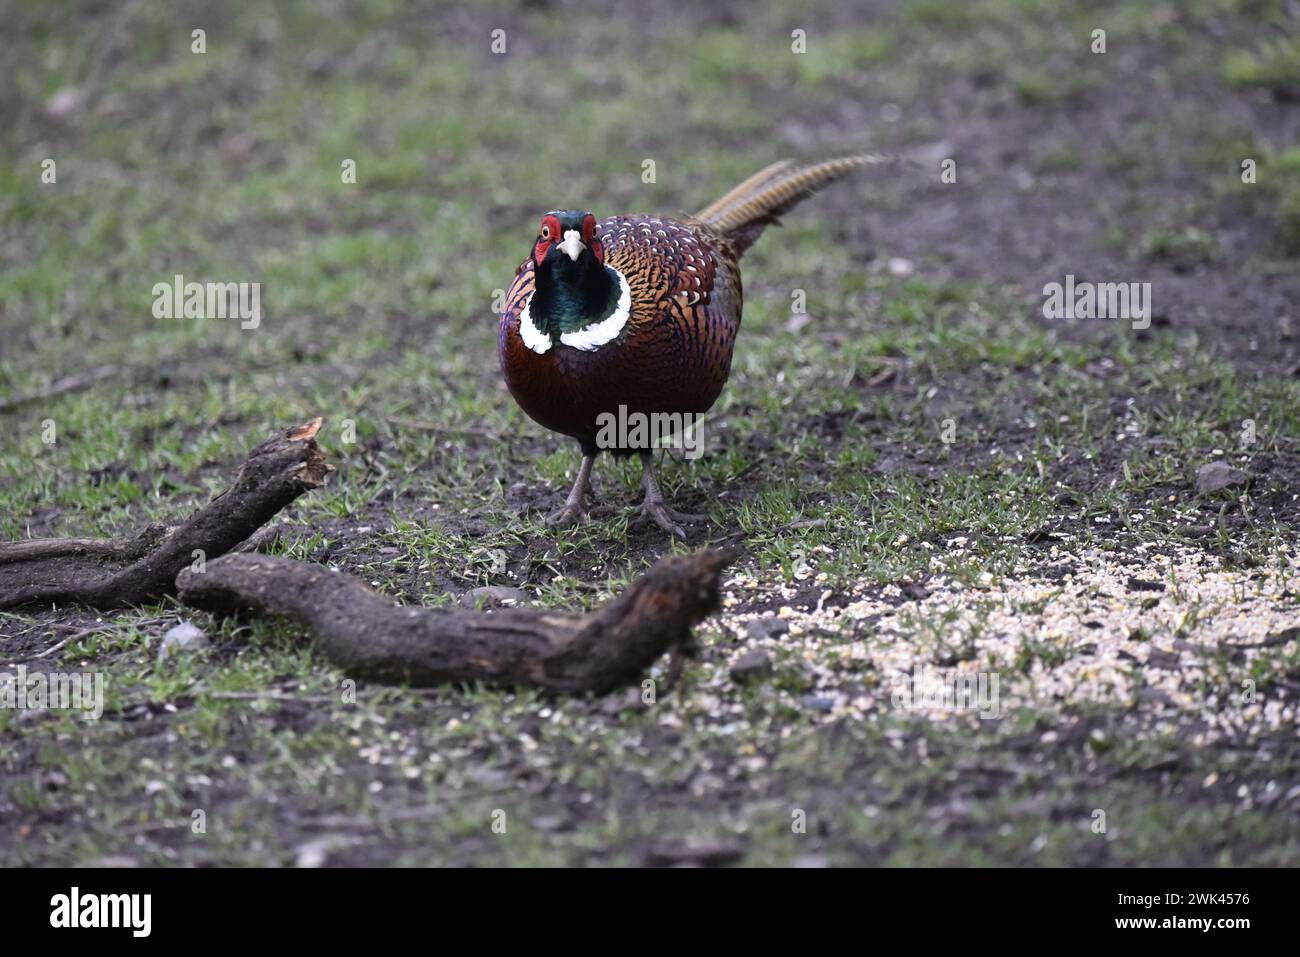 Copper Coloured Common Pheasant (Phasianus colchicus) Standing in Middle of Image, Facing Camera, taken in a Forest Clearing in the UK in Winter Stock Photo